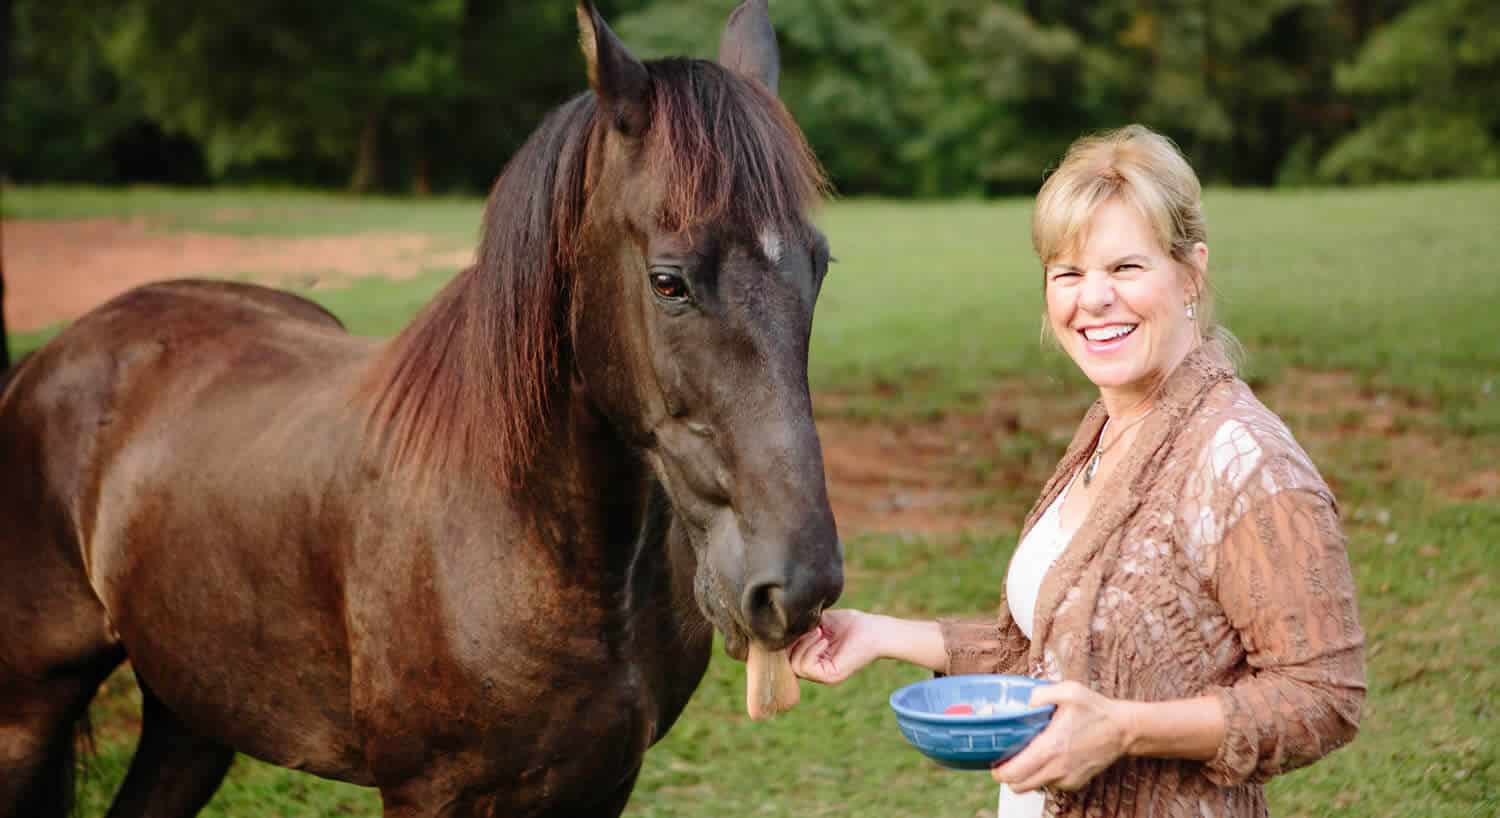 Smiling woman is feeding treats from a blue bowl to a brown horse.